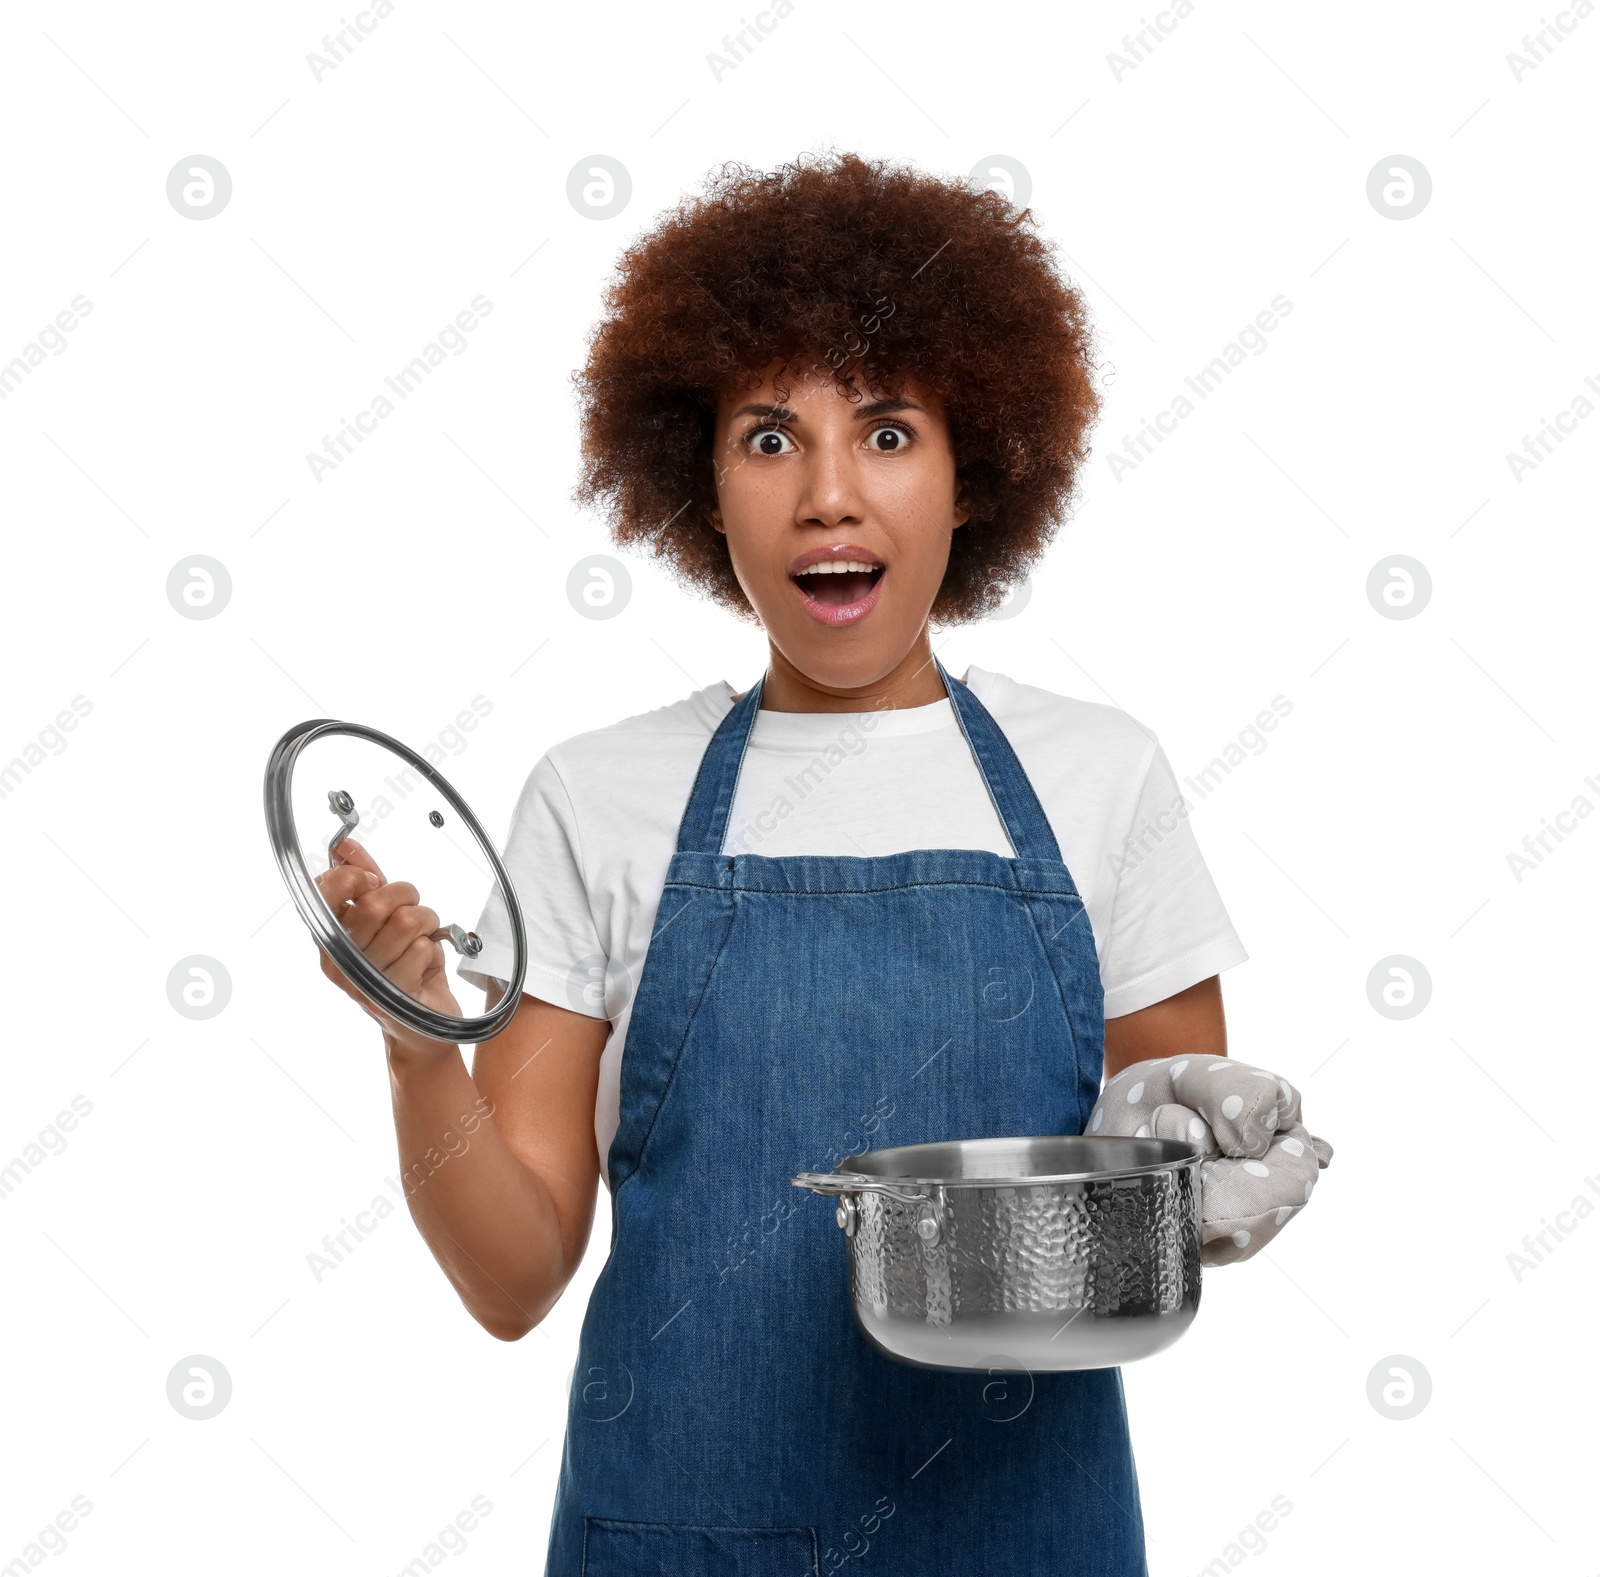 Photo of Emotional young woman in apron holding cooking pot on white background